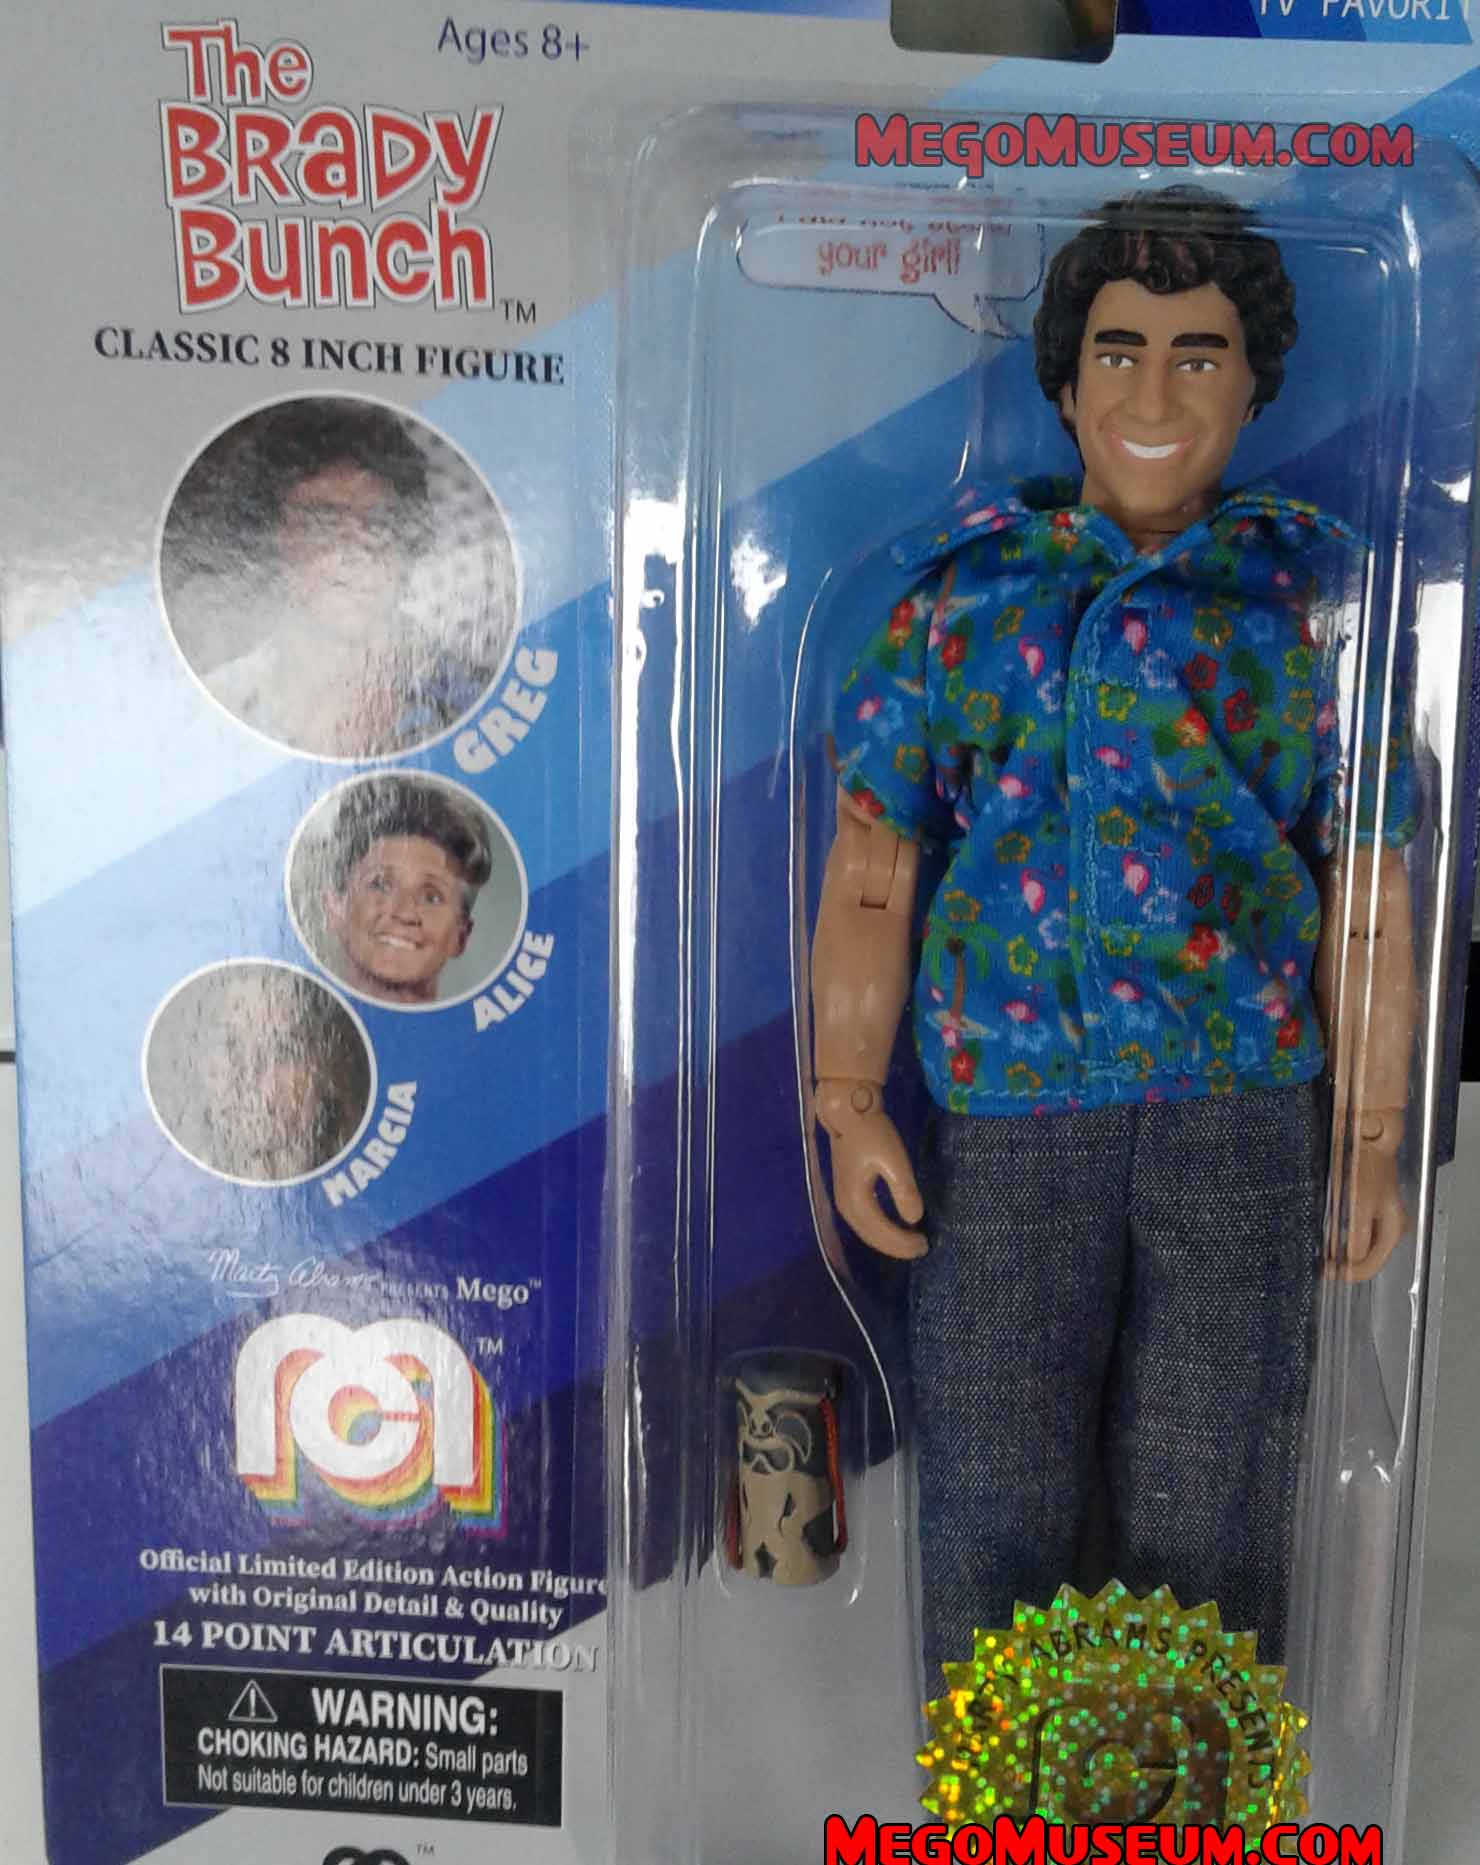 The Brady Bunch Greg Action Figure Doll MOC 8" Mego 2018 Retro TV Toy for sale online 